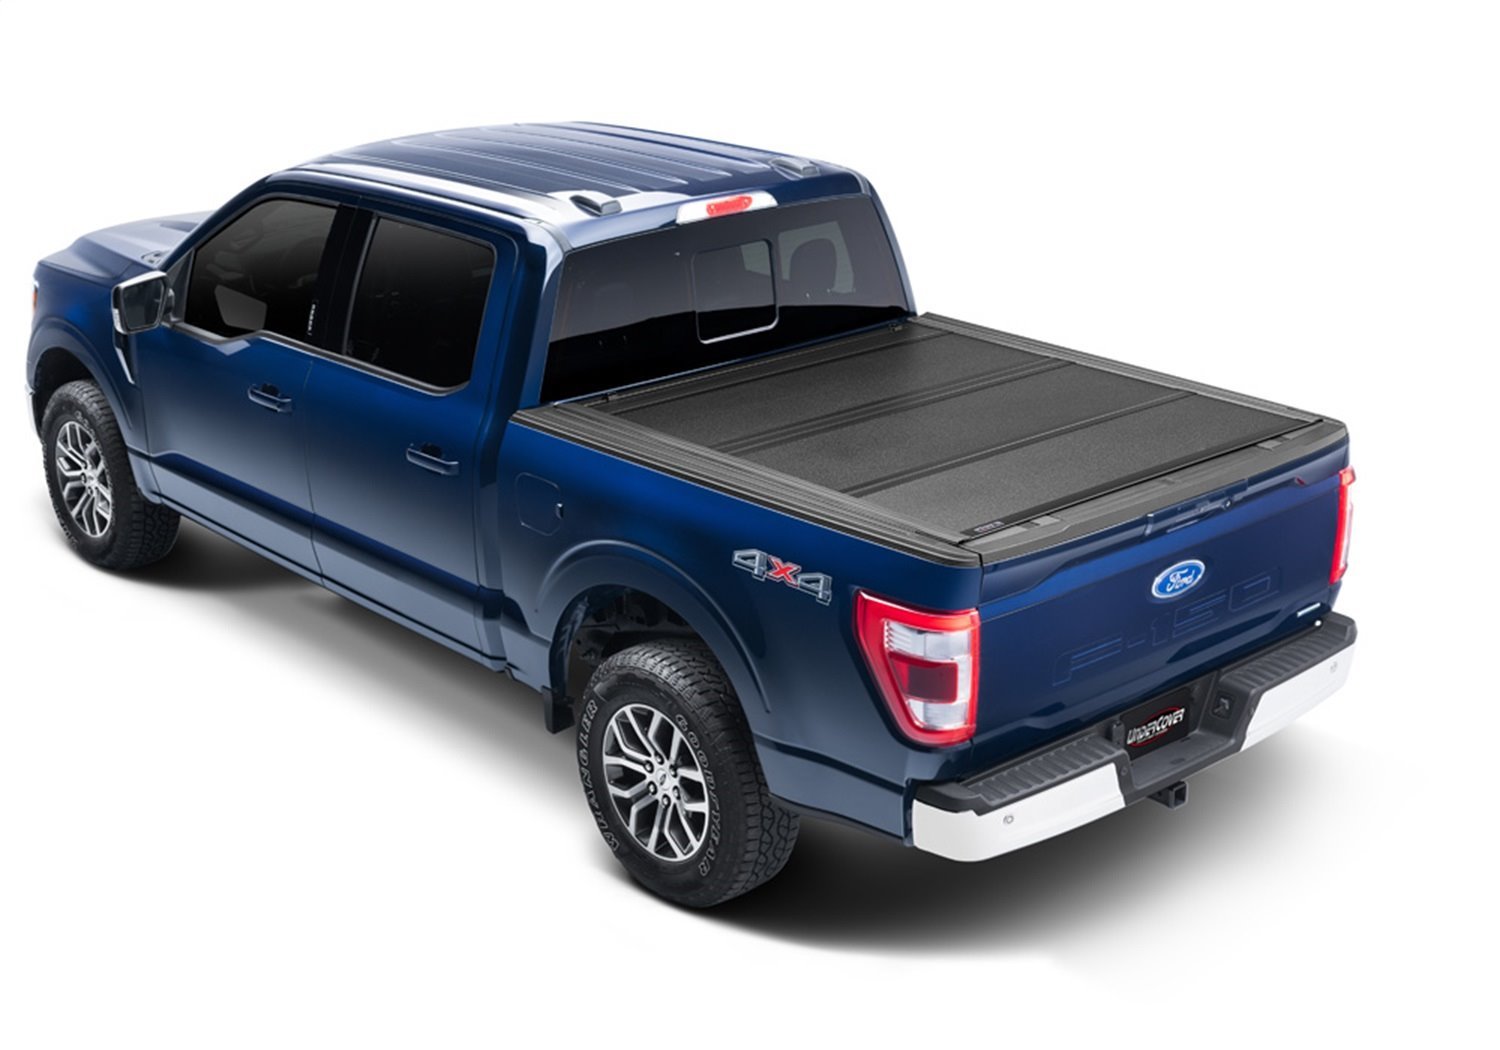 AX22029 Armor Flex Hard Folding Cover, Fits Select Ford F-150 5'7" Bed Crew Cab, (Includes Lightning) Black Textured